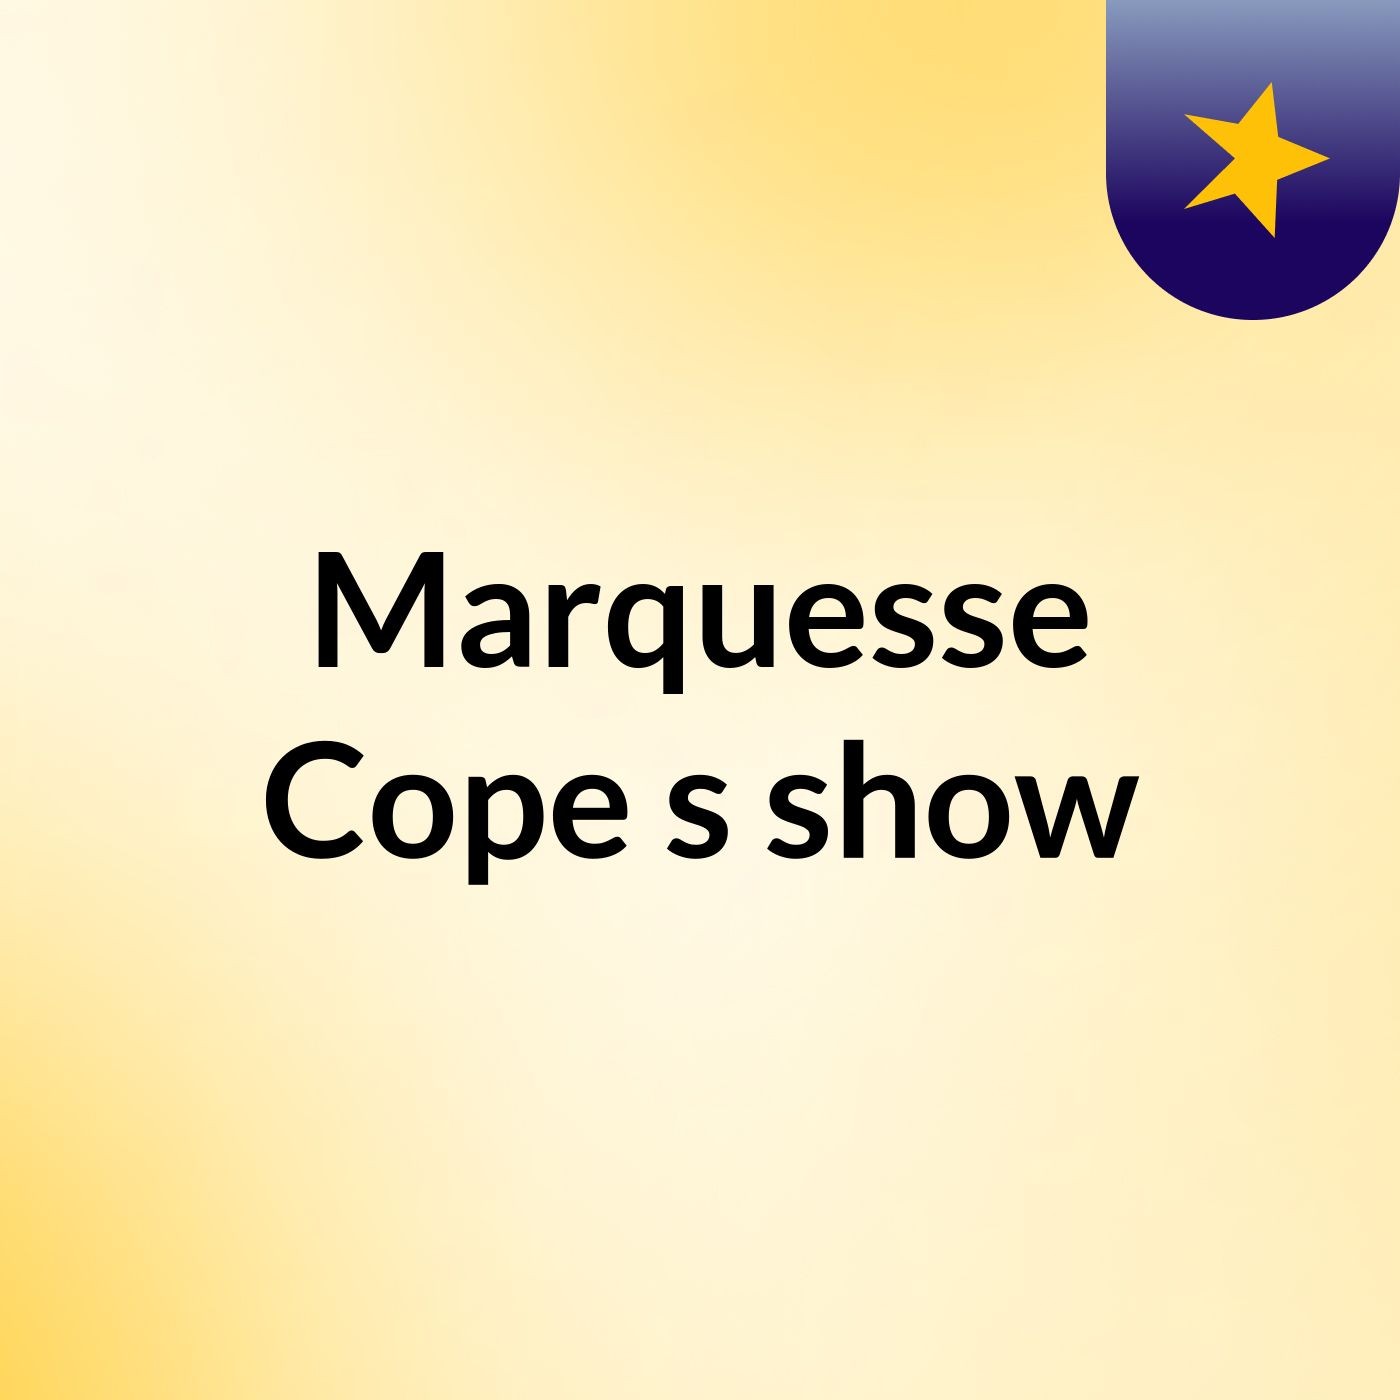 Marquesse Cope's show